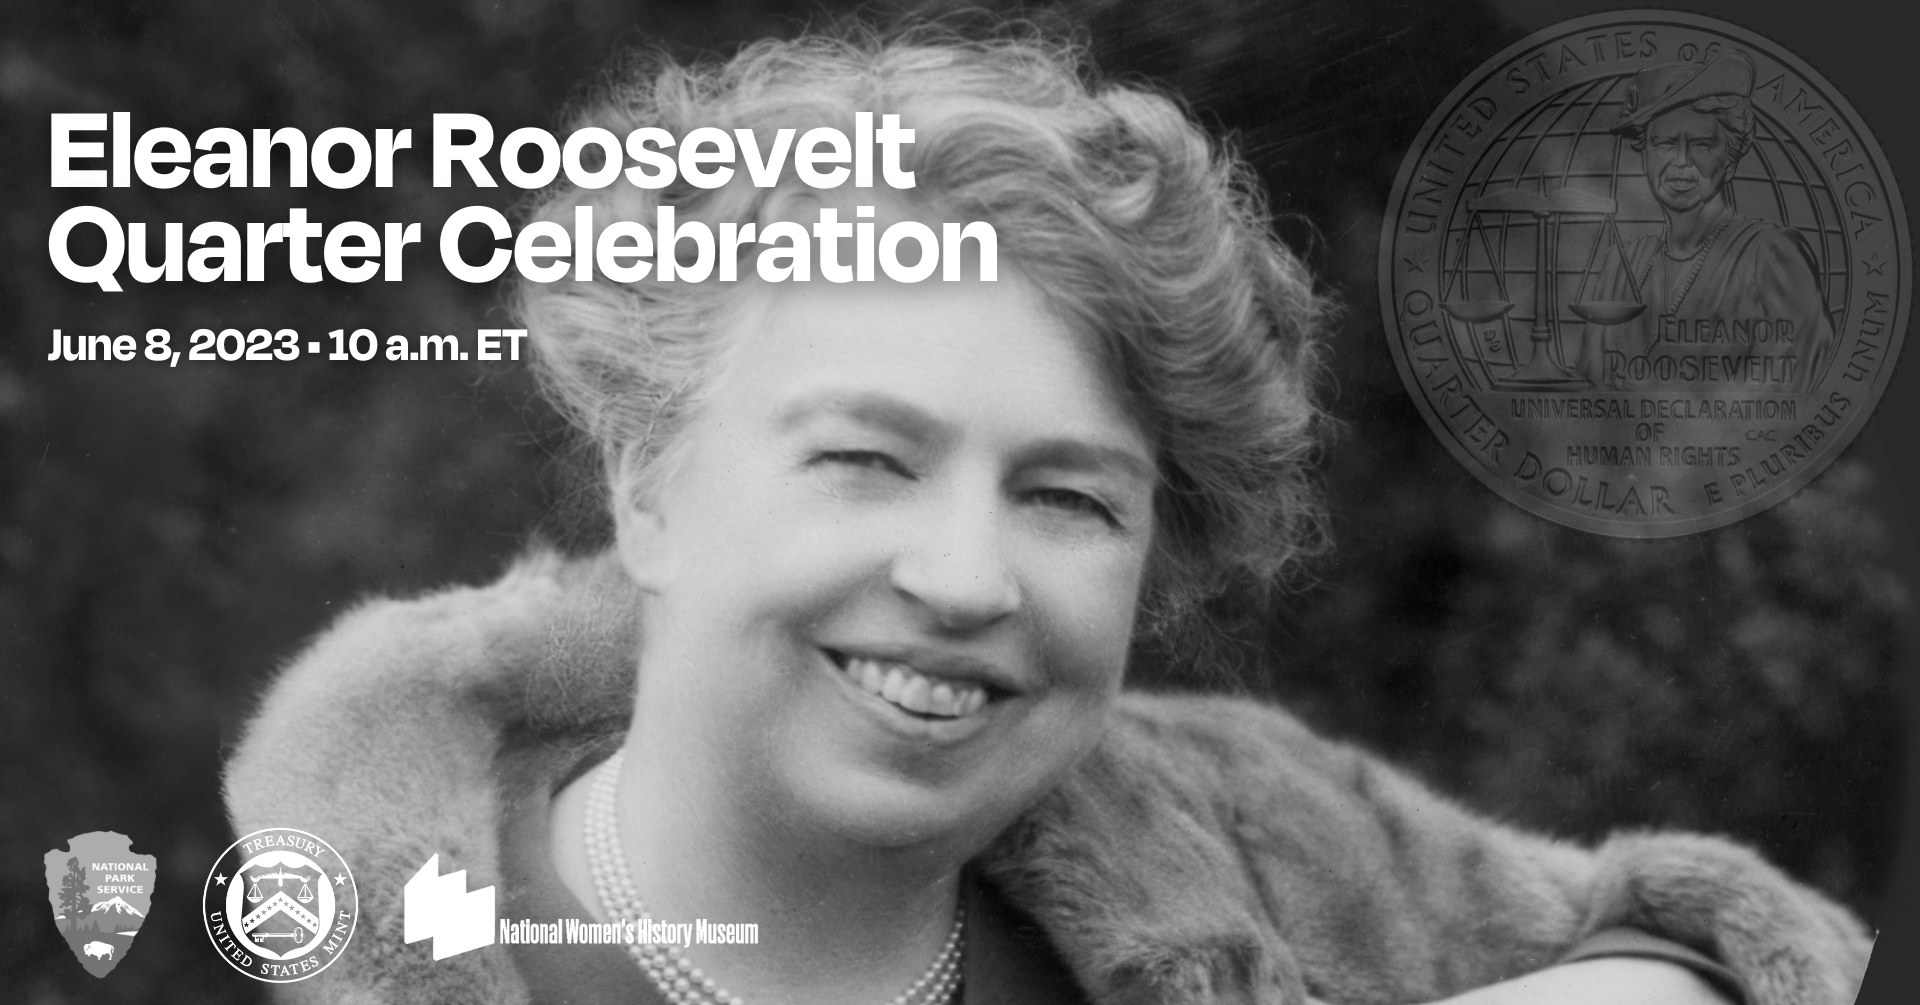 Black and white close up of Eleanor Roosevelt smiling. Text says "Eleanor Roosevelt Quarter Celebration" June 8, 2023 at 10 a.m. ET. Includes small logo of National Park Service, U.S. Mint, and National Women's History Museum.